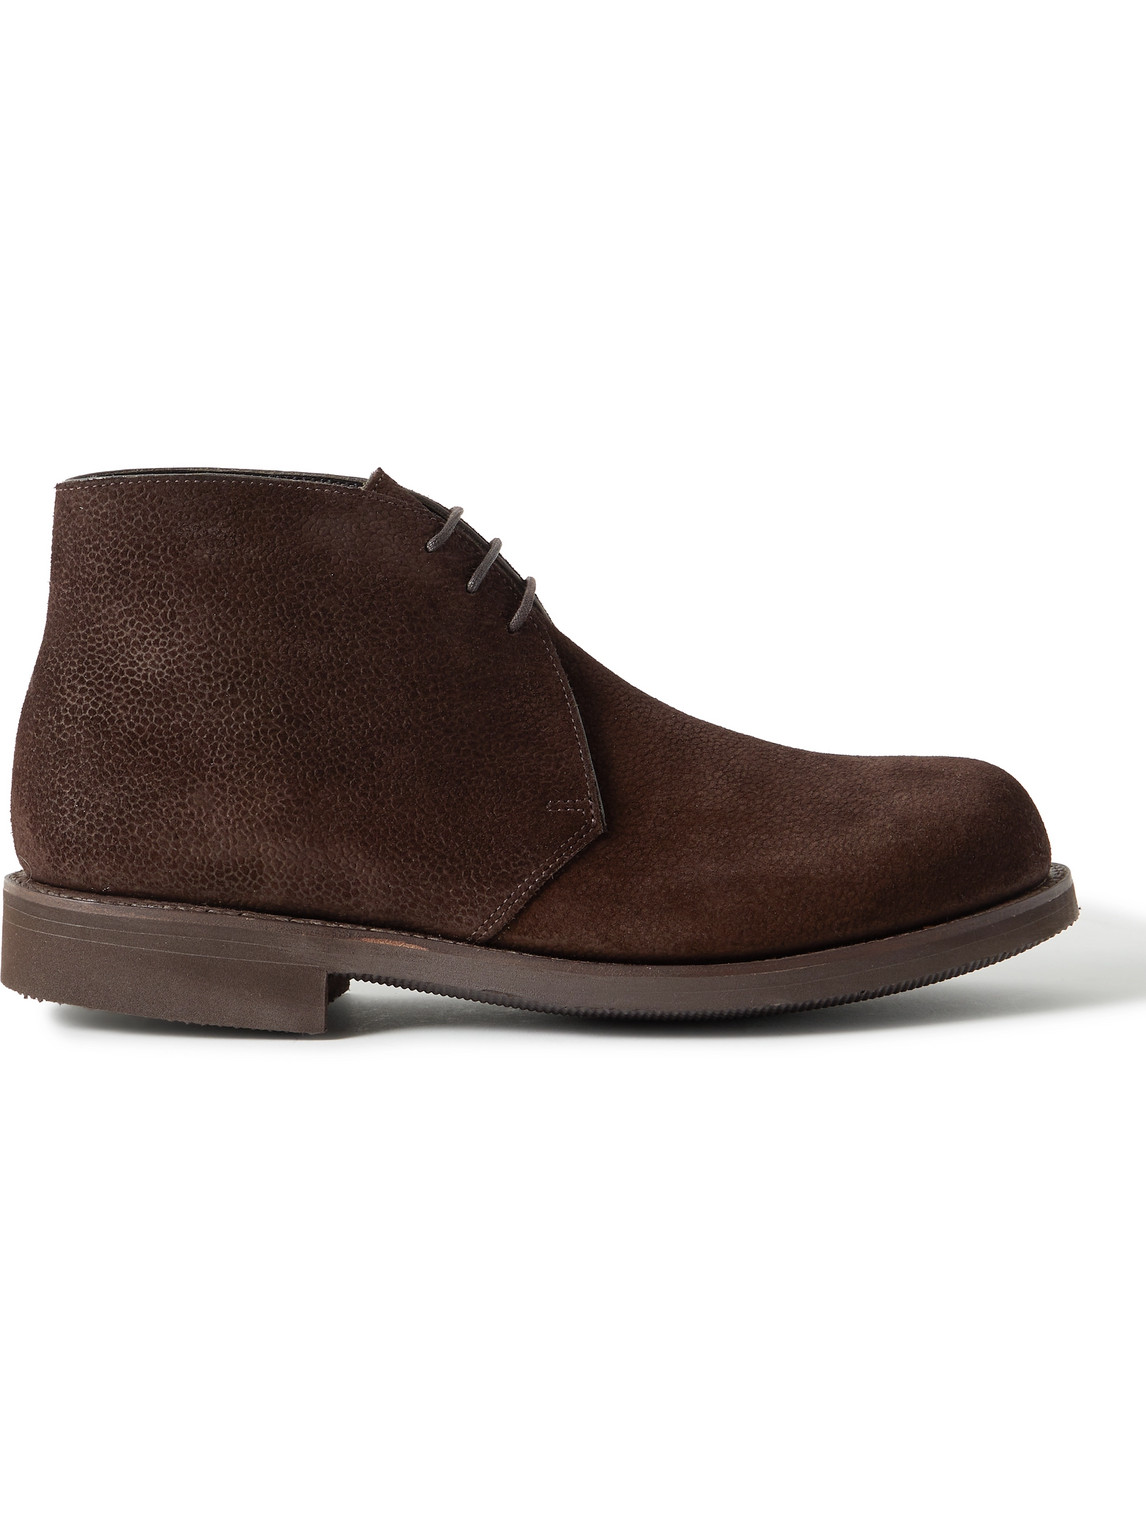 George Cleverley Jacob Full-grain Suede Chukka Boots In Brown